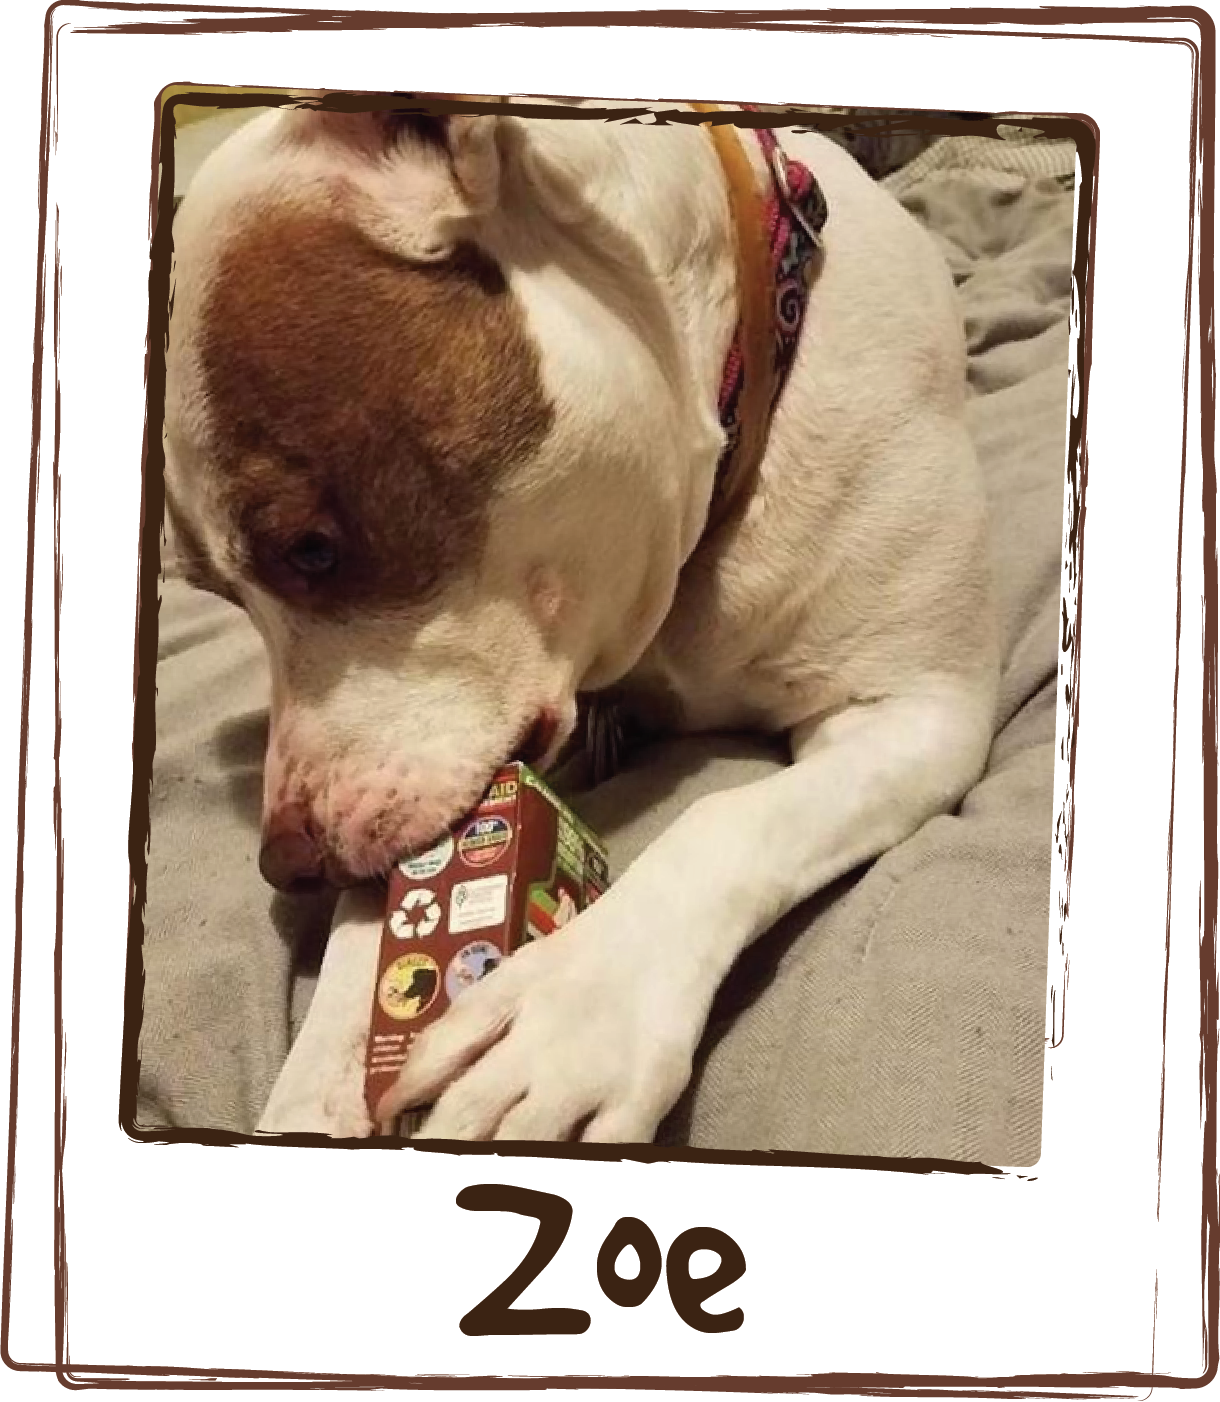  “When I get anxious, mama gives me @lickspillfree Zen. I love both the chicken and the beef flavors. I lick it right out of the packet, or mix in my food!”  